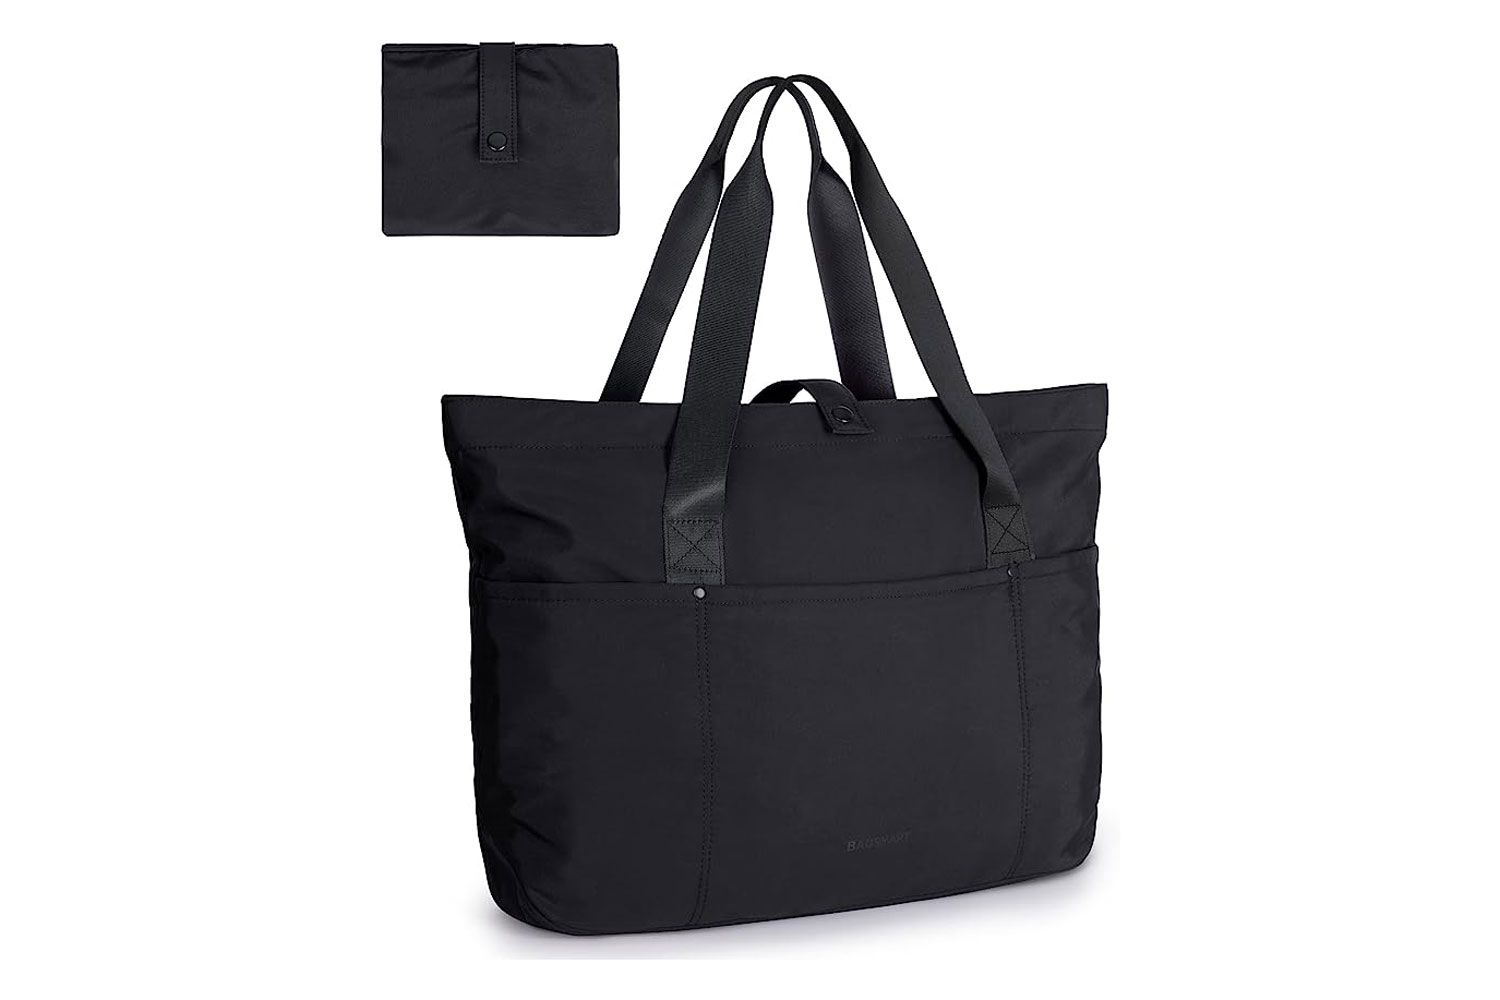 Amazon BAGSMART Tote Bag for Women, Foldable Tote Bag With Zipper